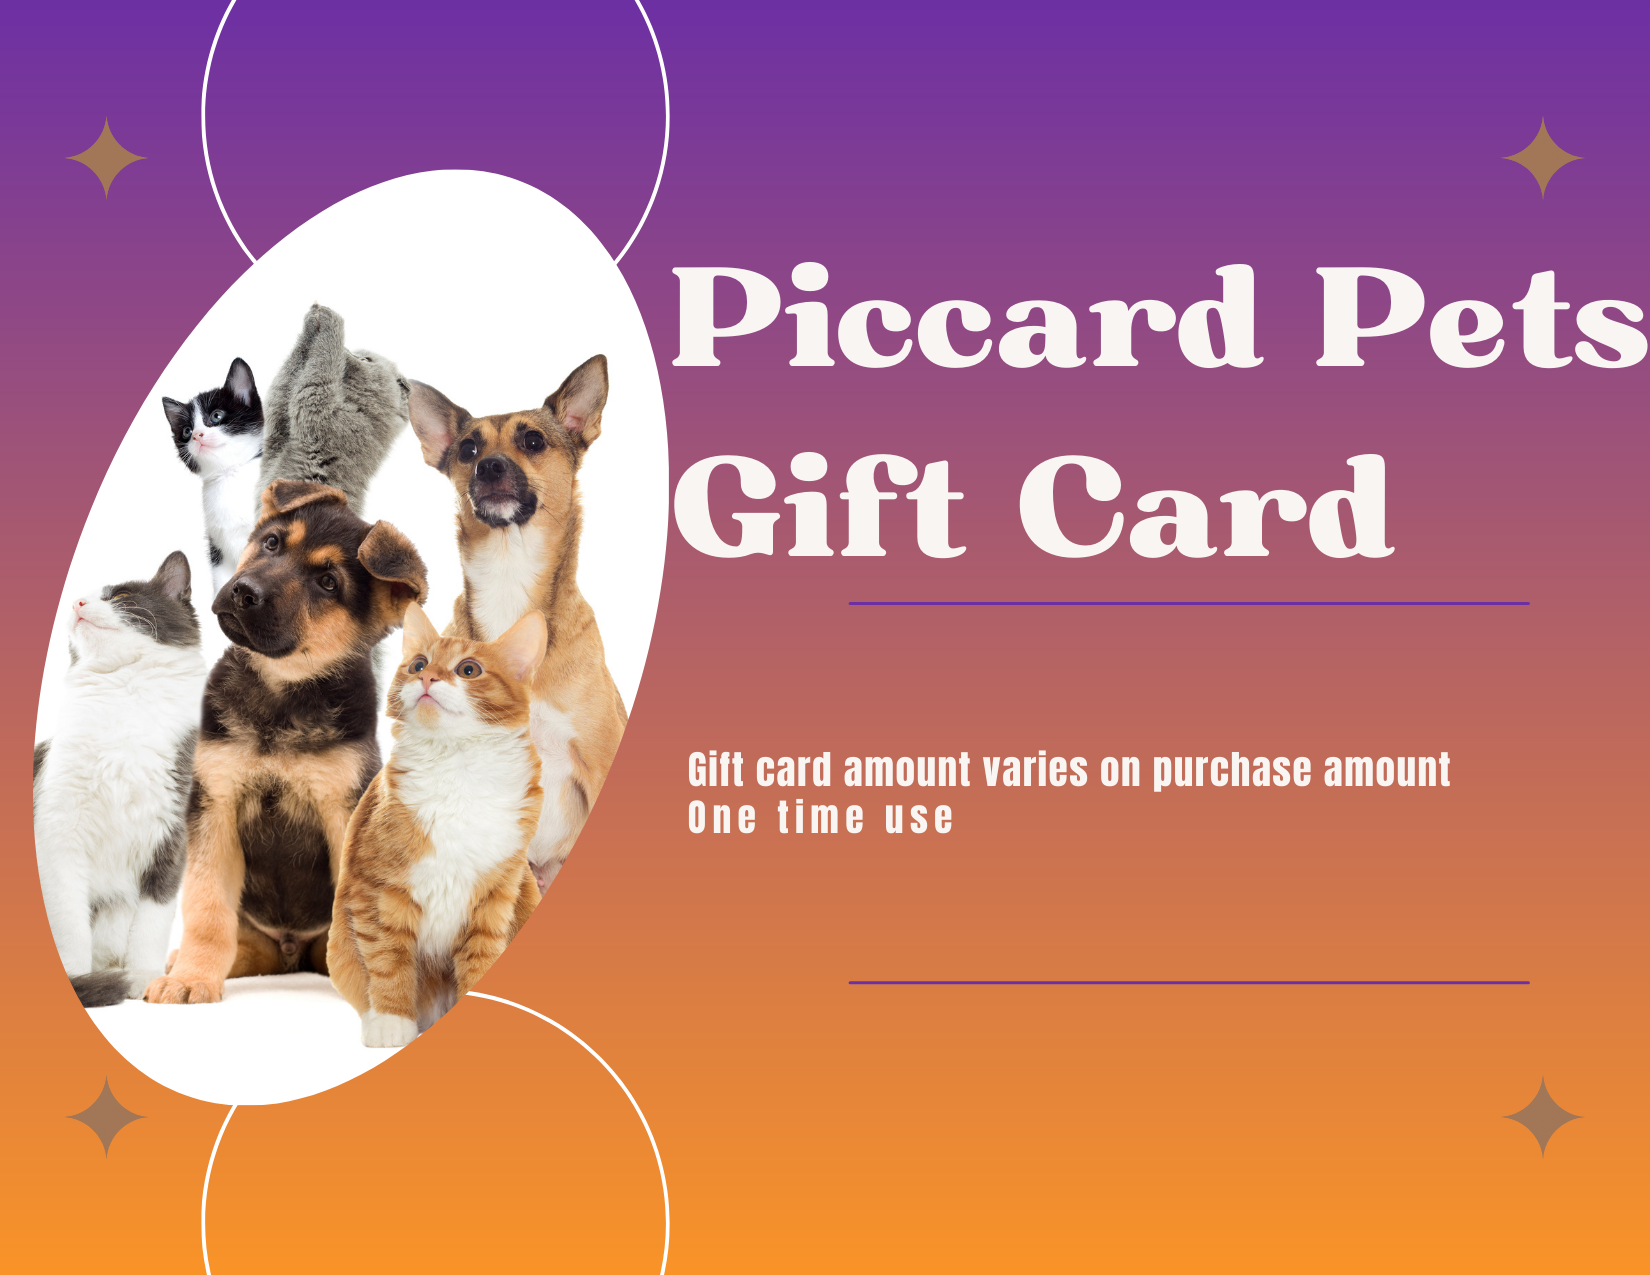 Piccard Pets Gift Card